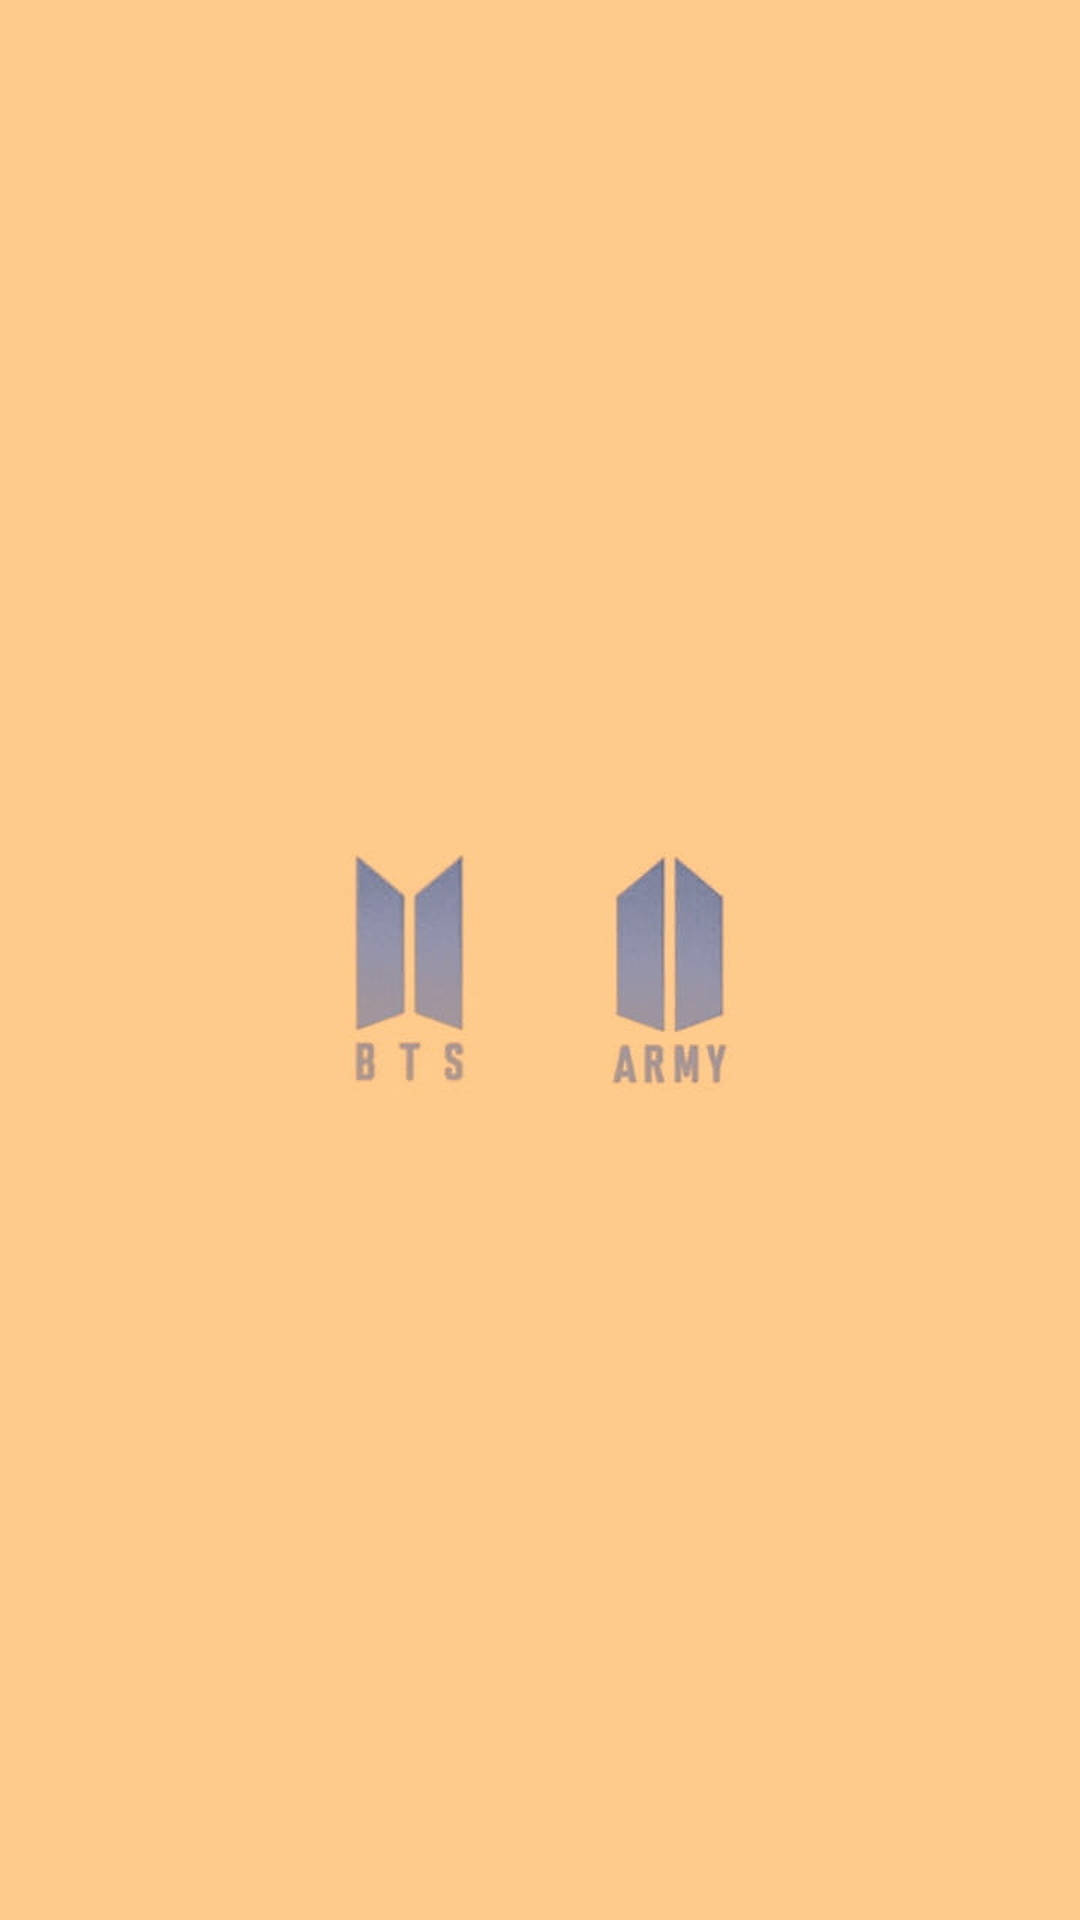 BTS Army Yellow Poster Wallpaper